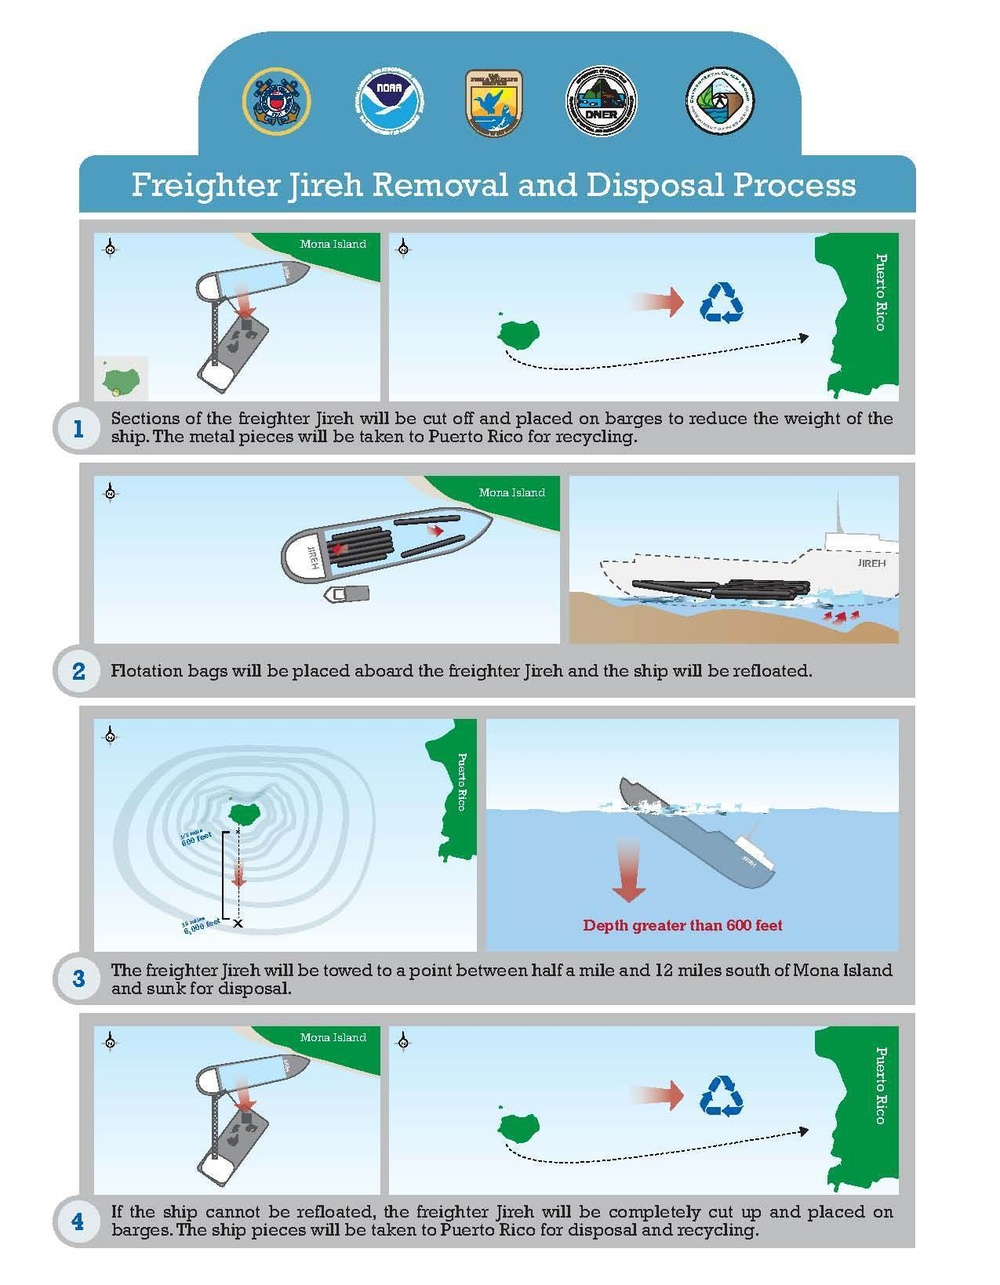 Jireh Removal and Disposal Proces